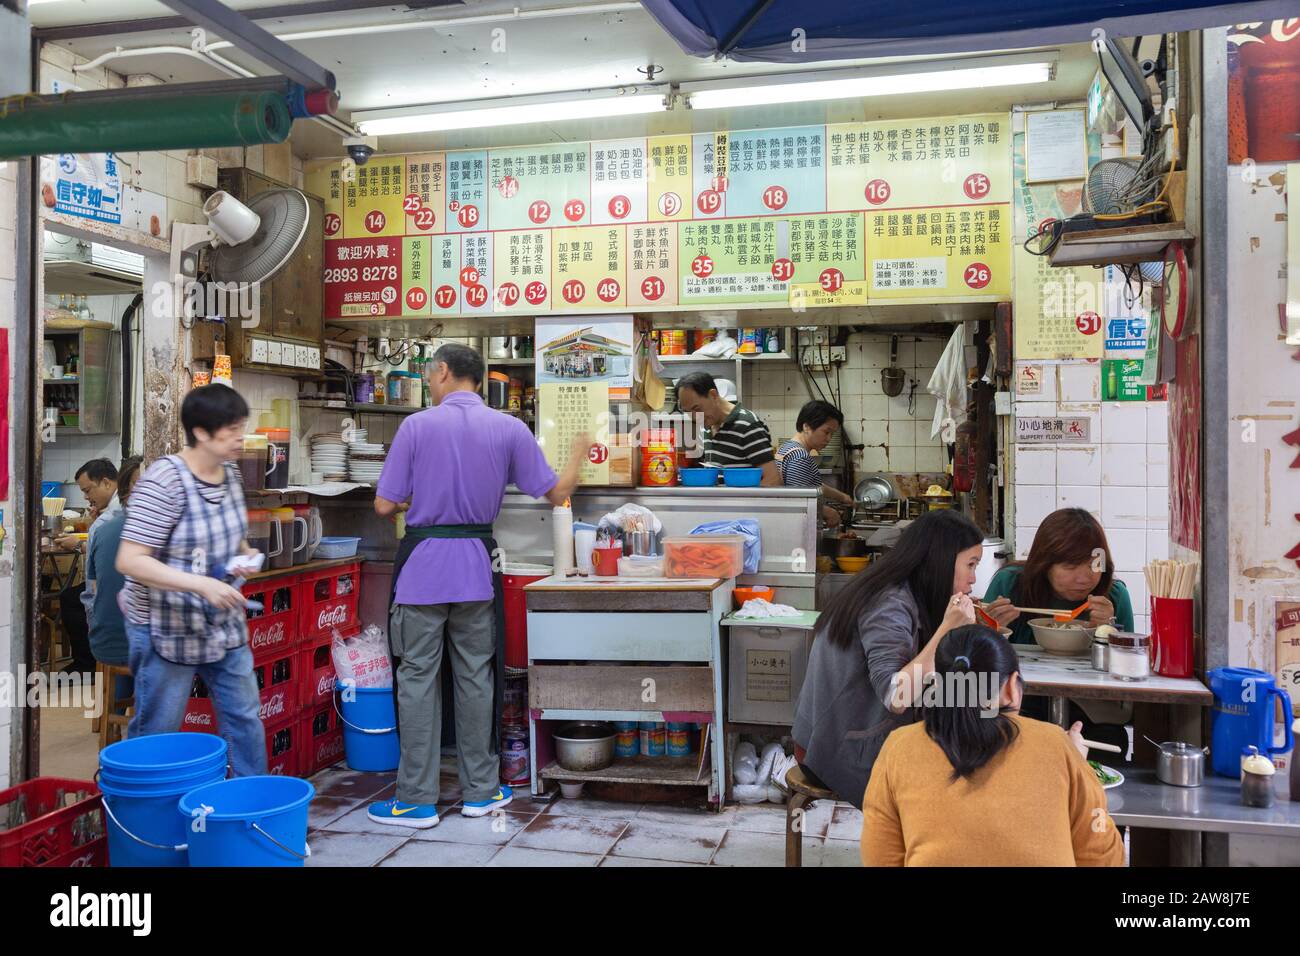 Asian street food; people eating in a roadside cafe or food stall, Wan Chai district, Hong Kong Asia - example of asia lifestyle Stock Photo